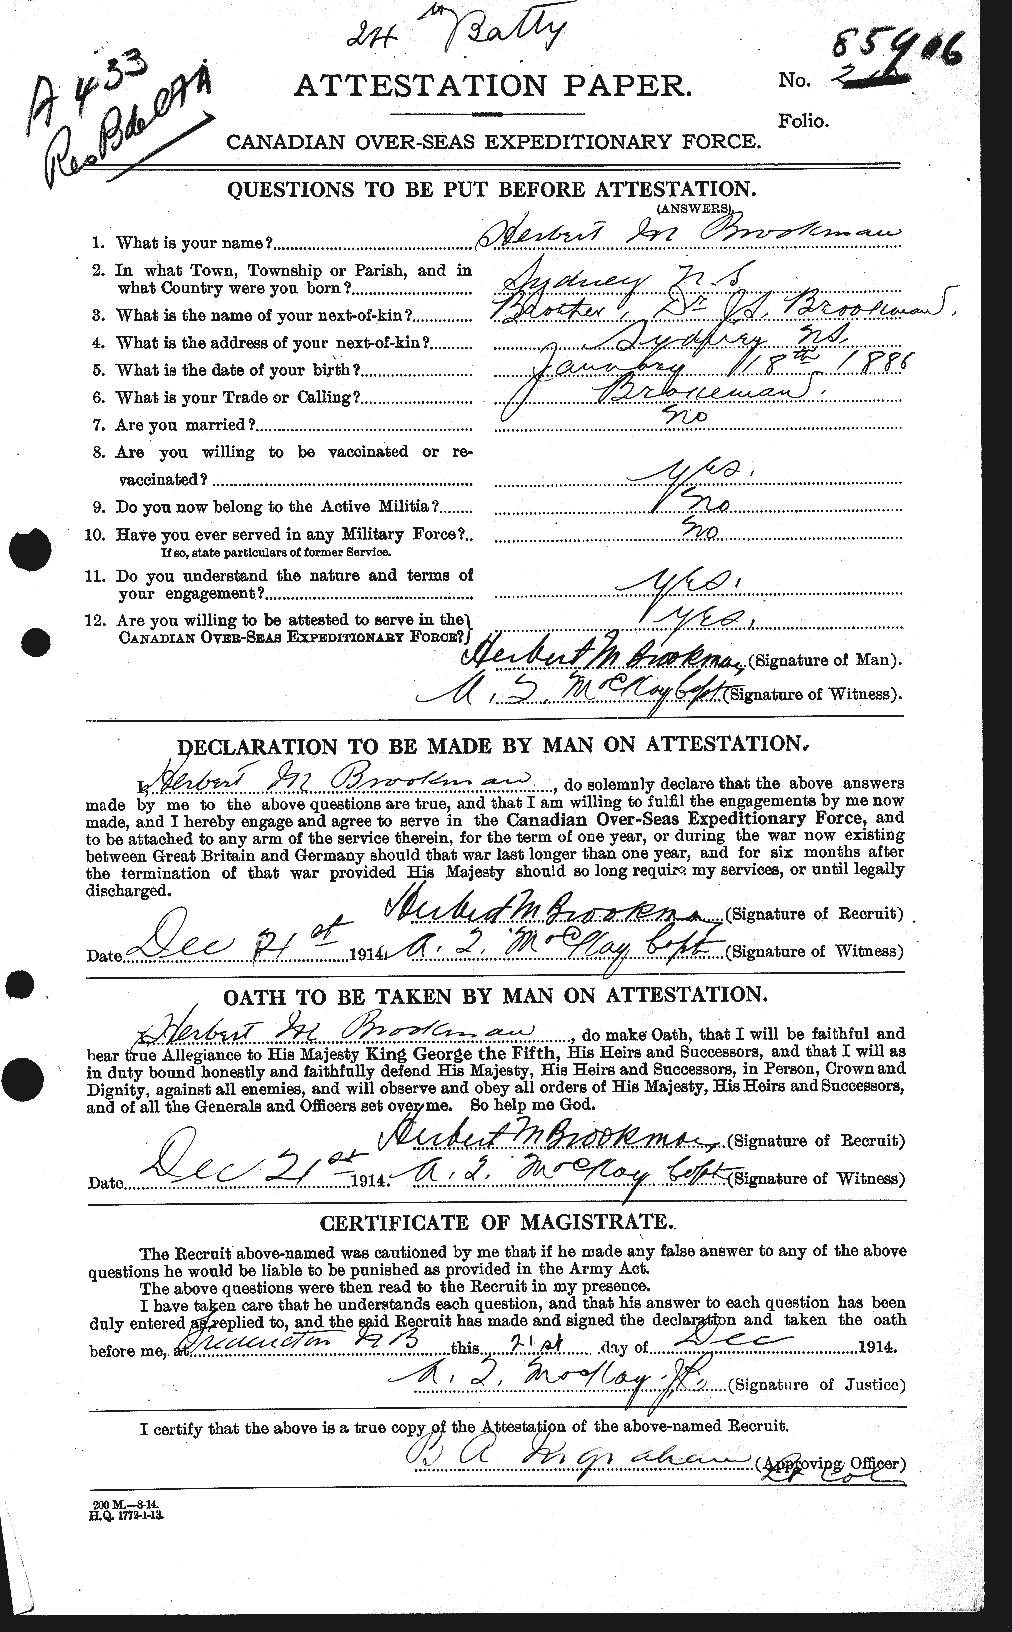 Personnel Records of the First World War - CEF 261448a